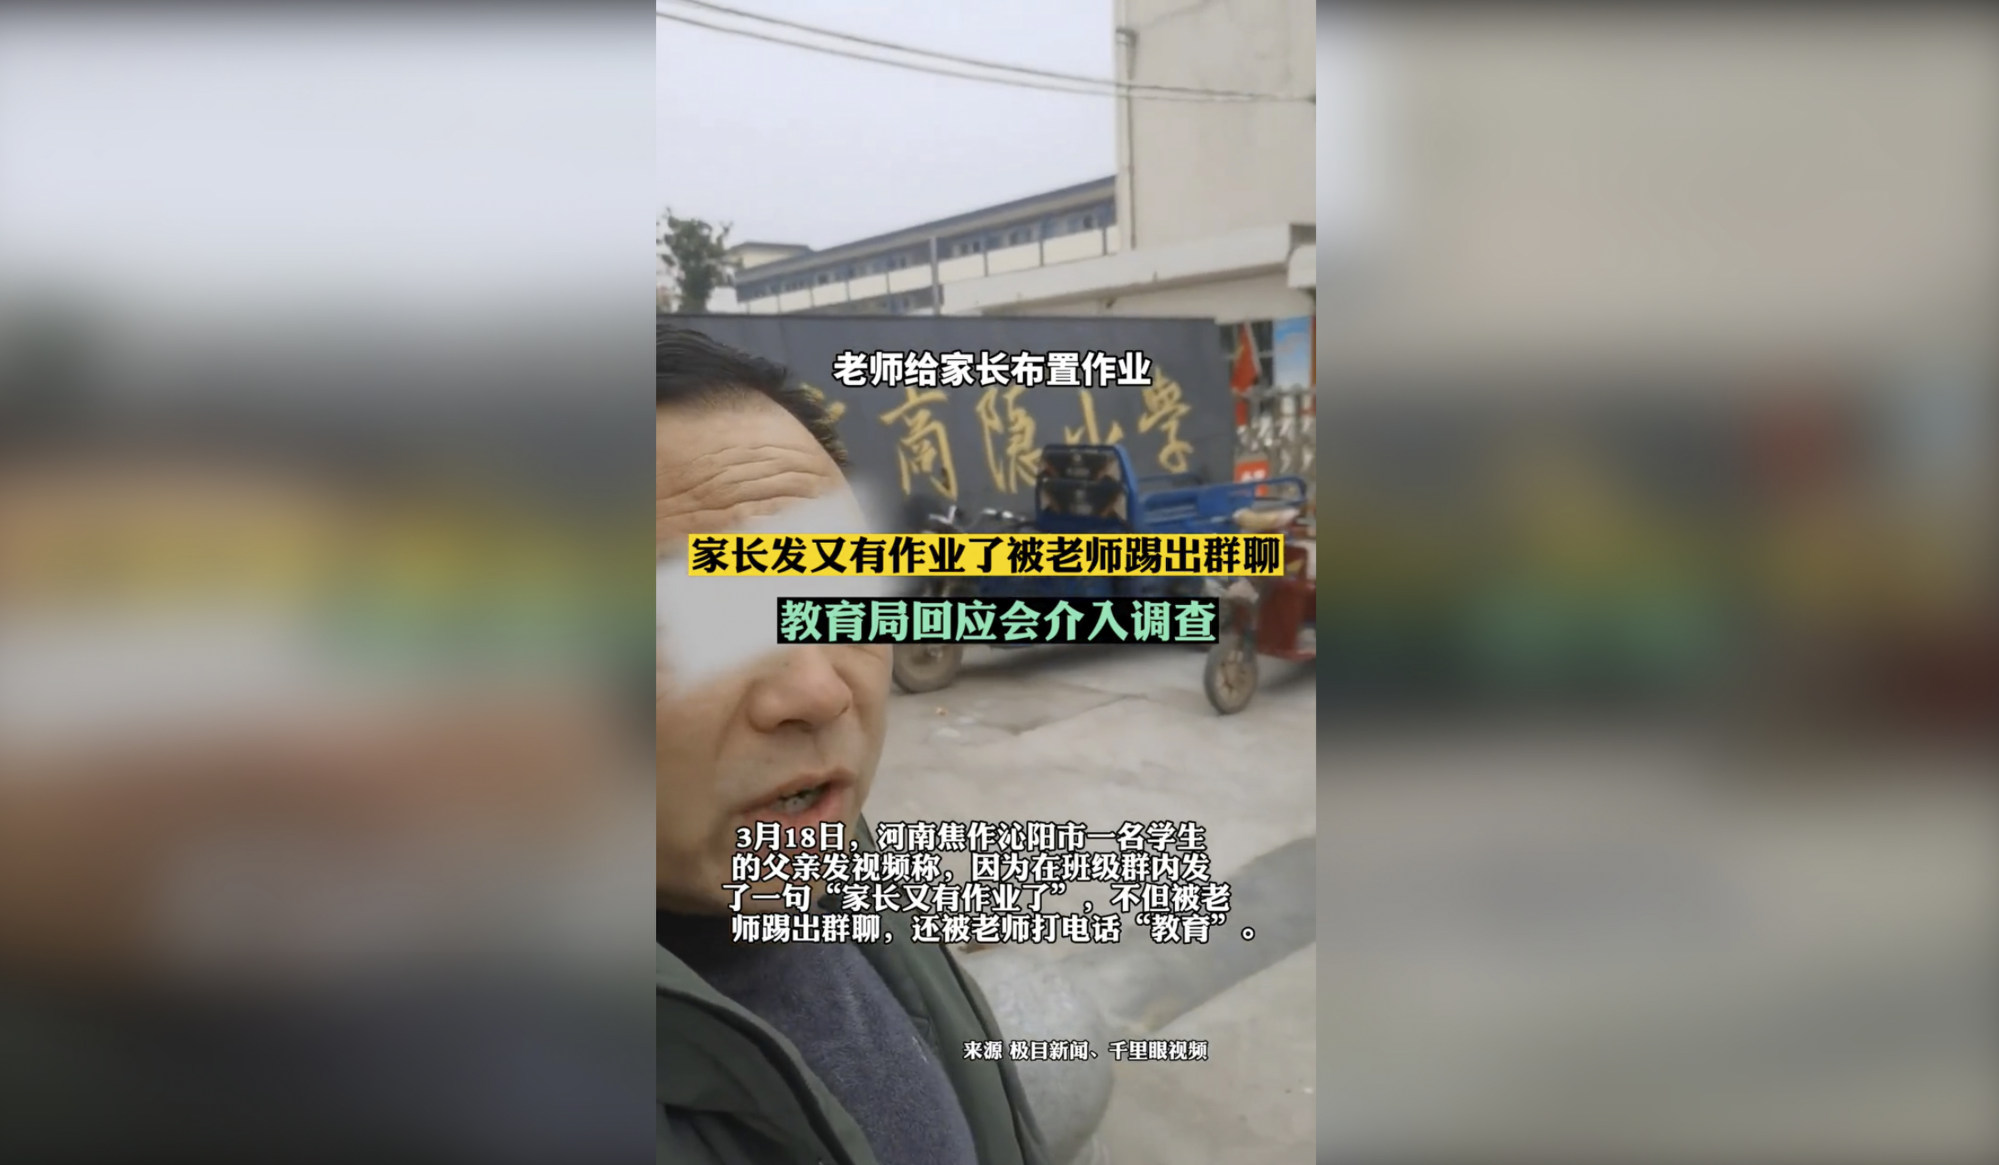 In a viral video he filmed outside the school grounds, the father gave his perspective on the incident. Photo: Douyin